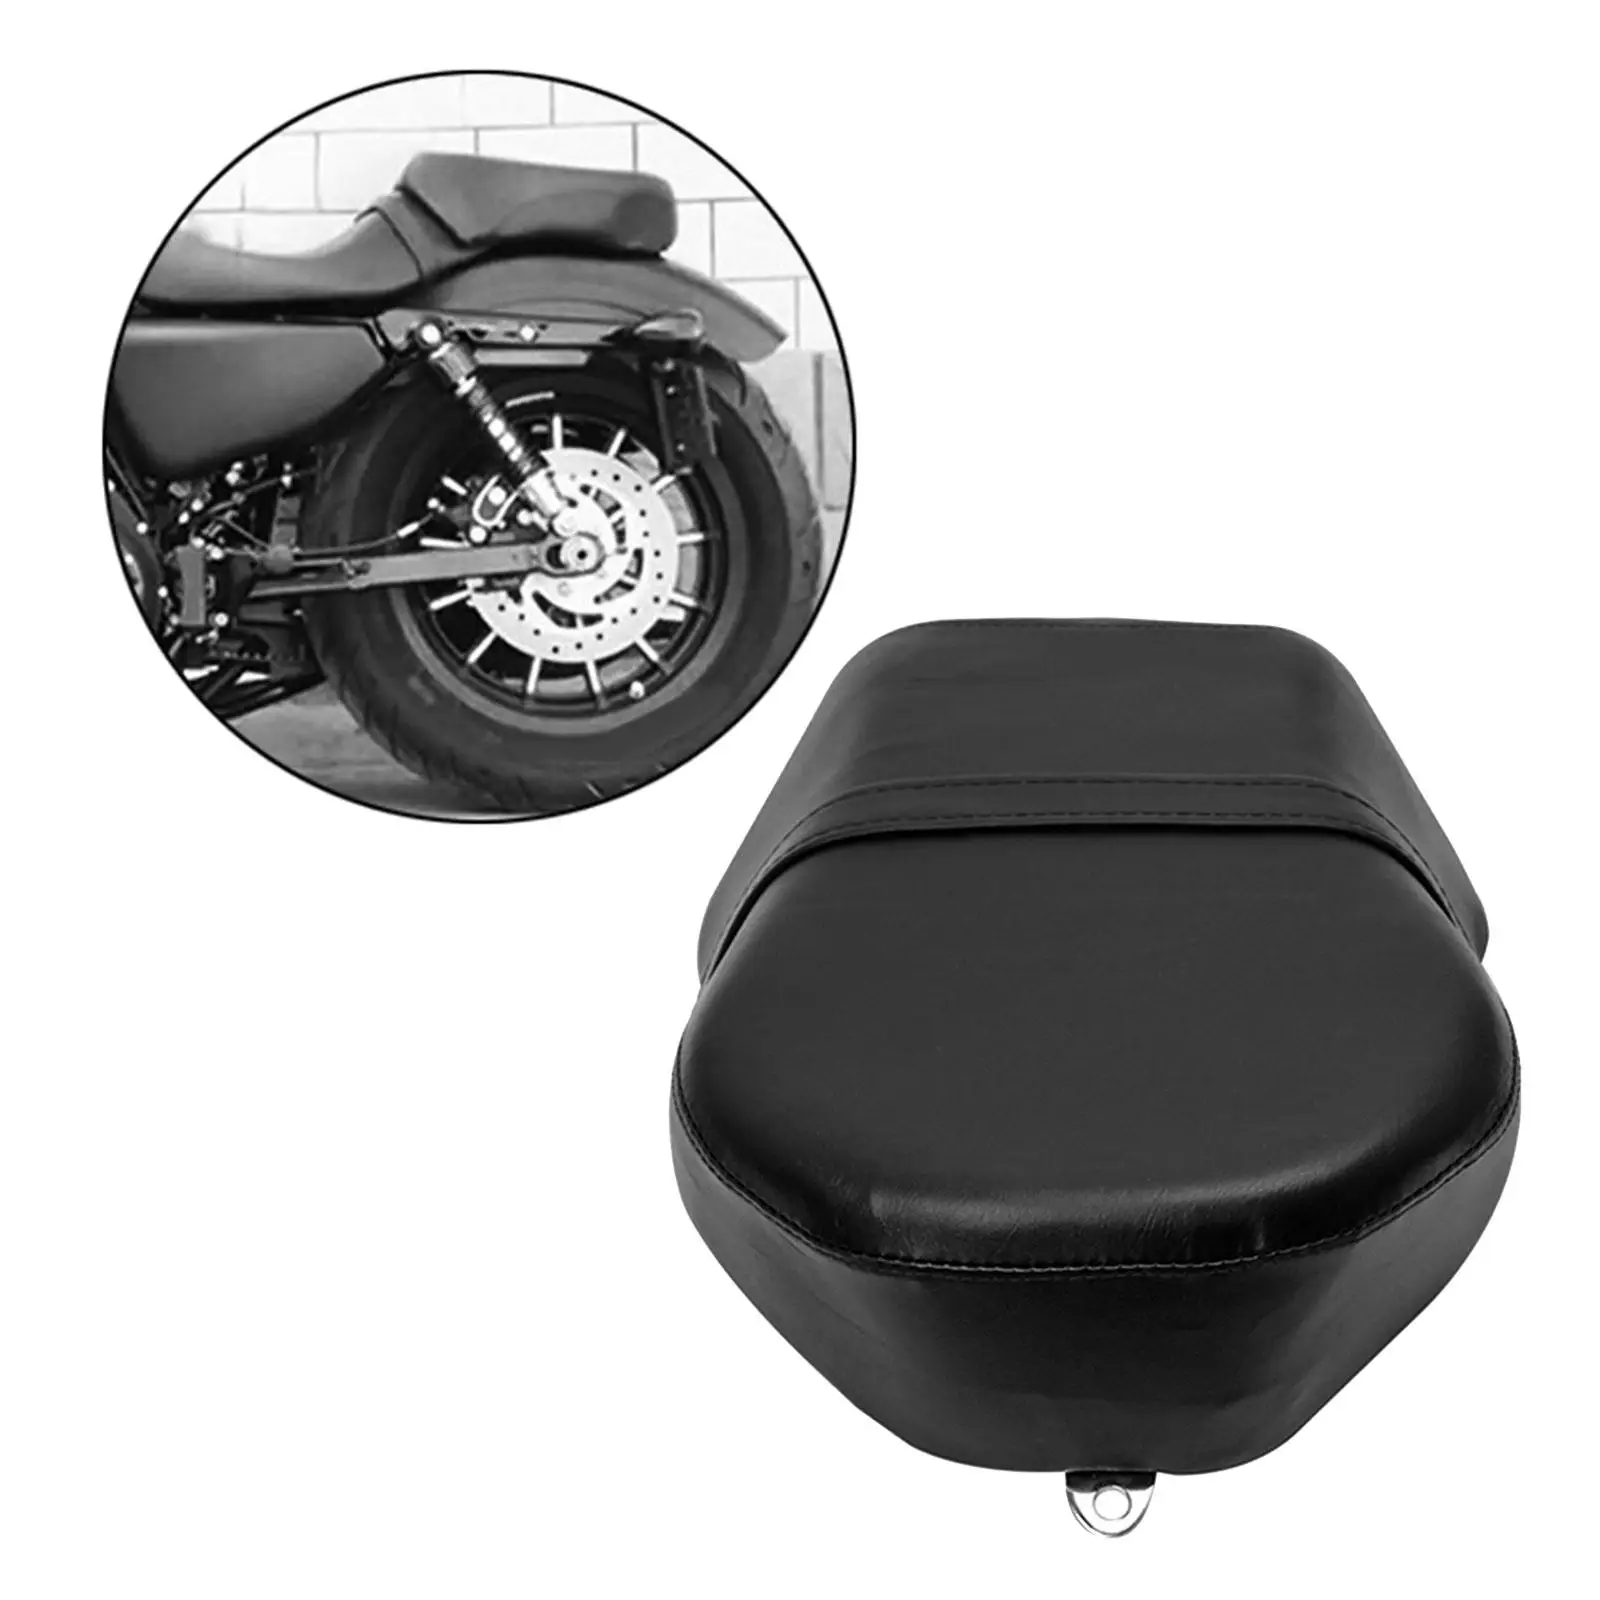 Motorcycle Pillion Passenger Pad Seat for Harley Sportster Durable